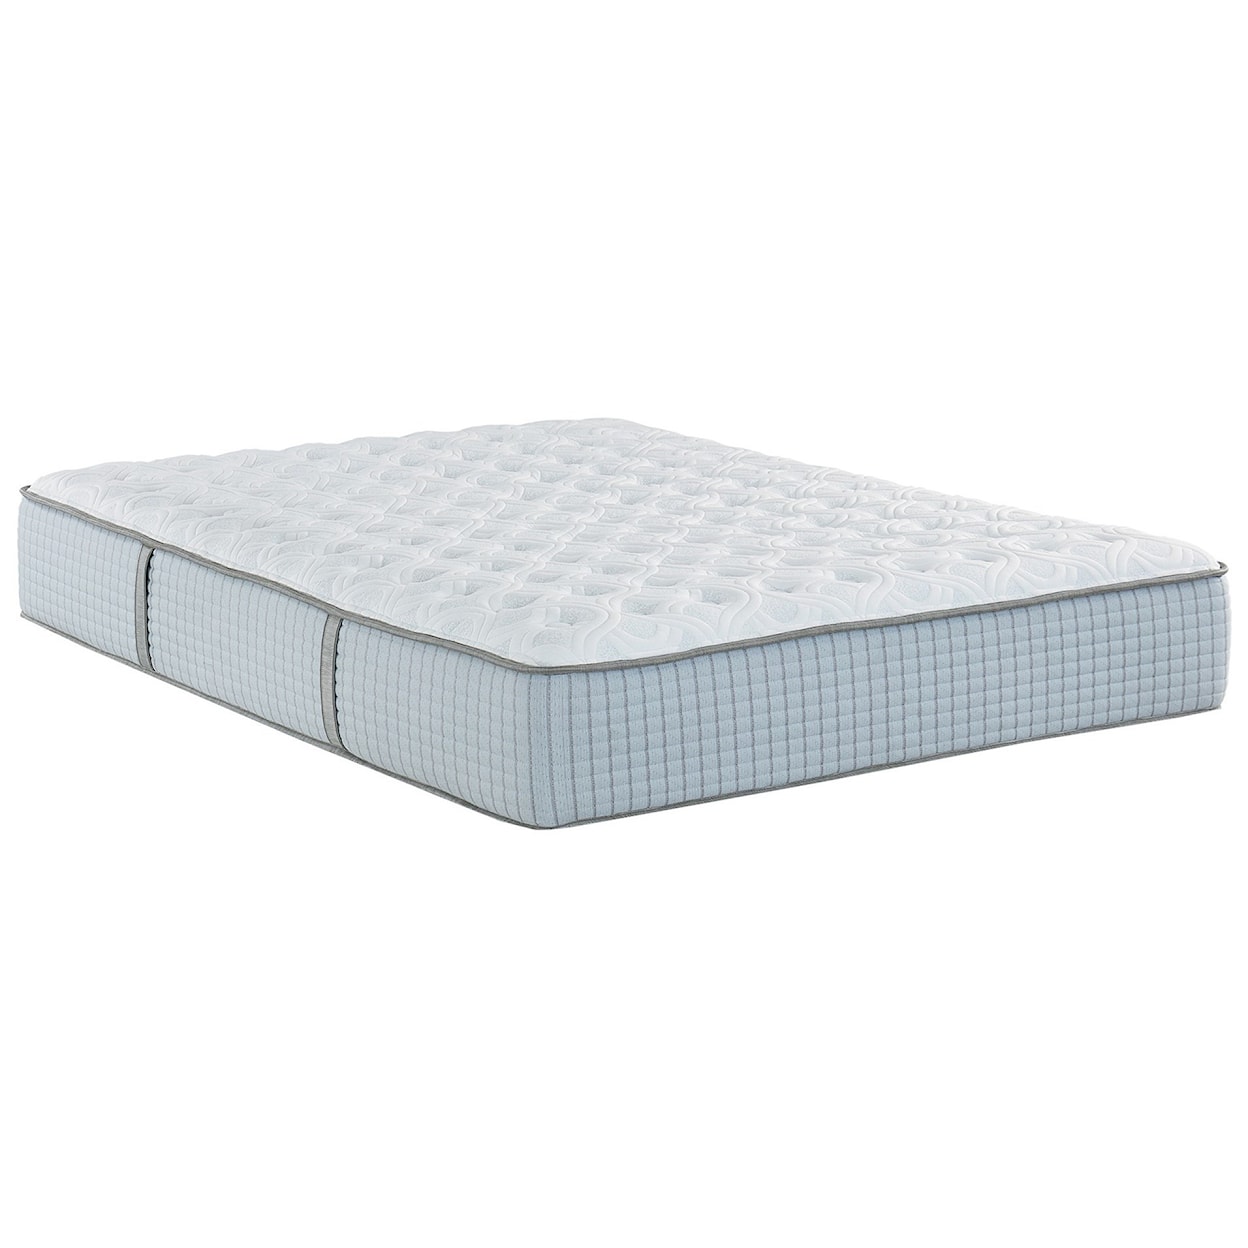 Restonic Chantelle Extra Firm Full Extra Firm 2-Sided Mattress